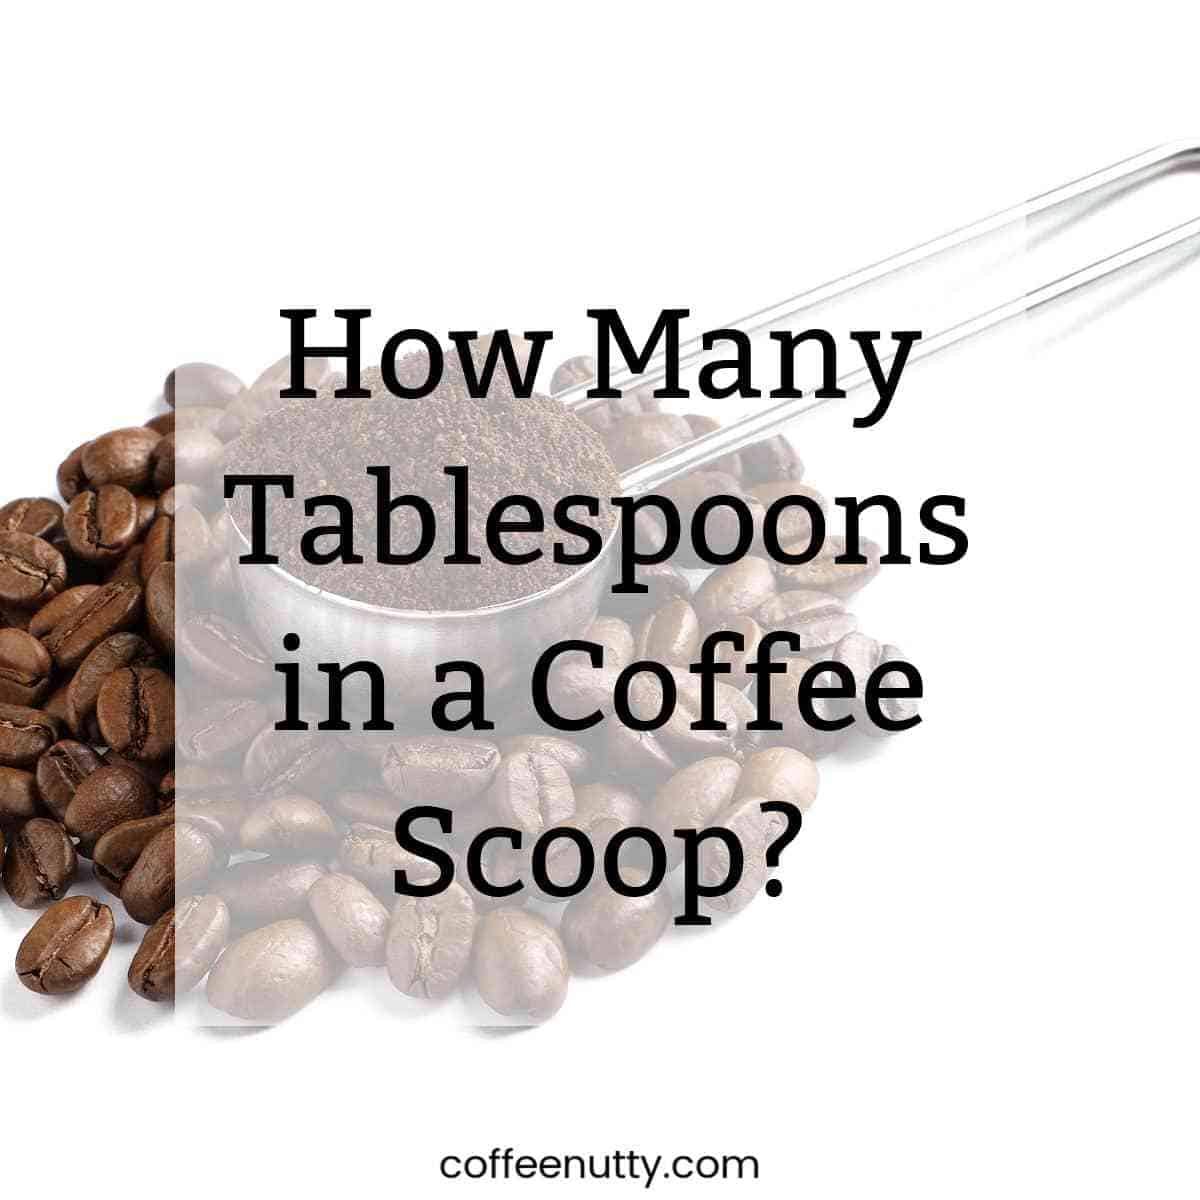 Coffee scoop with ground coffee with text overlay reading "how many tablespoons in a cup of coffee?"